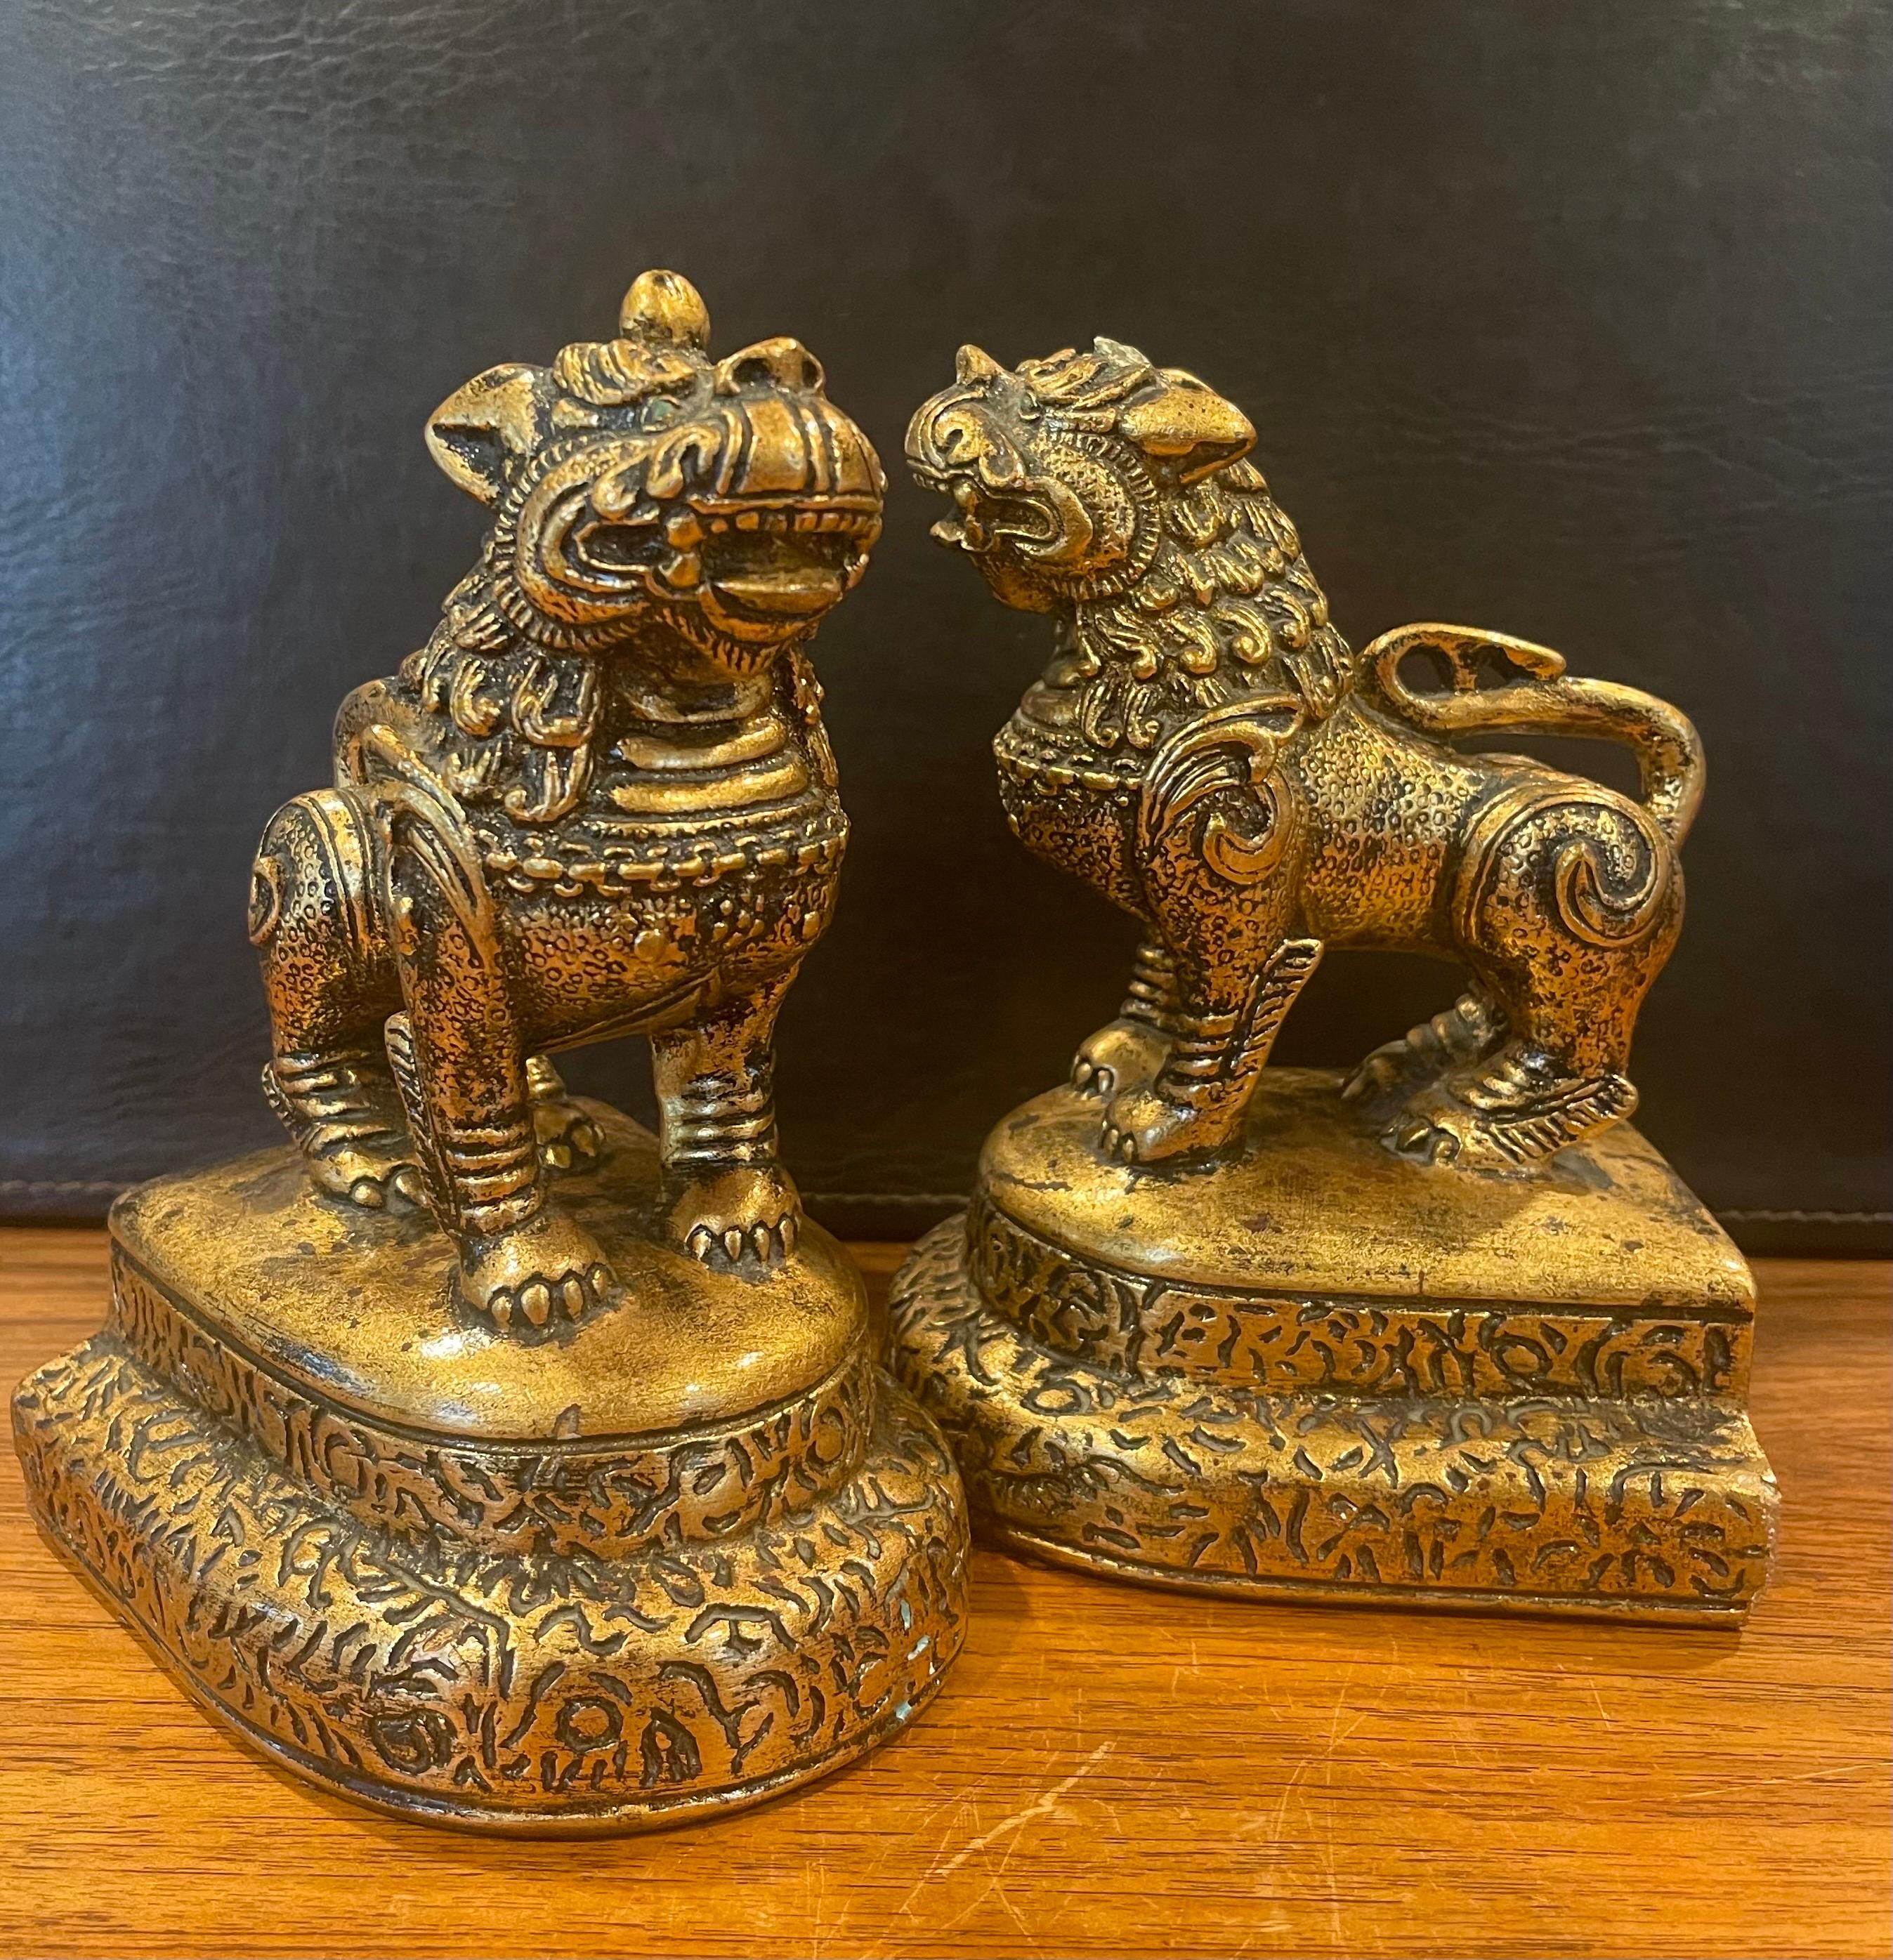 A very nice pair of mid-century gold gilt plaster foo dog bookends by Jaru of California, circa 1970s. These symbolic guardians present a beautiful hollywood regency vibe and are in very good vintage condition with the exception of a few small chips